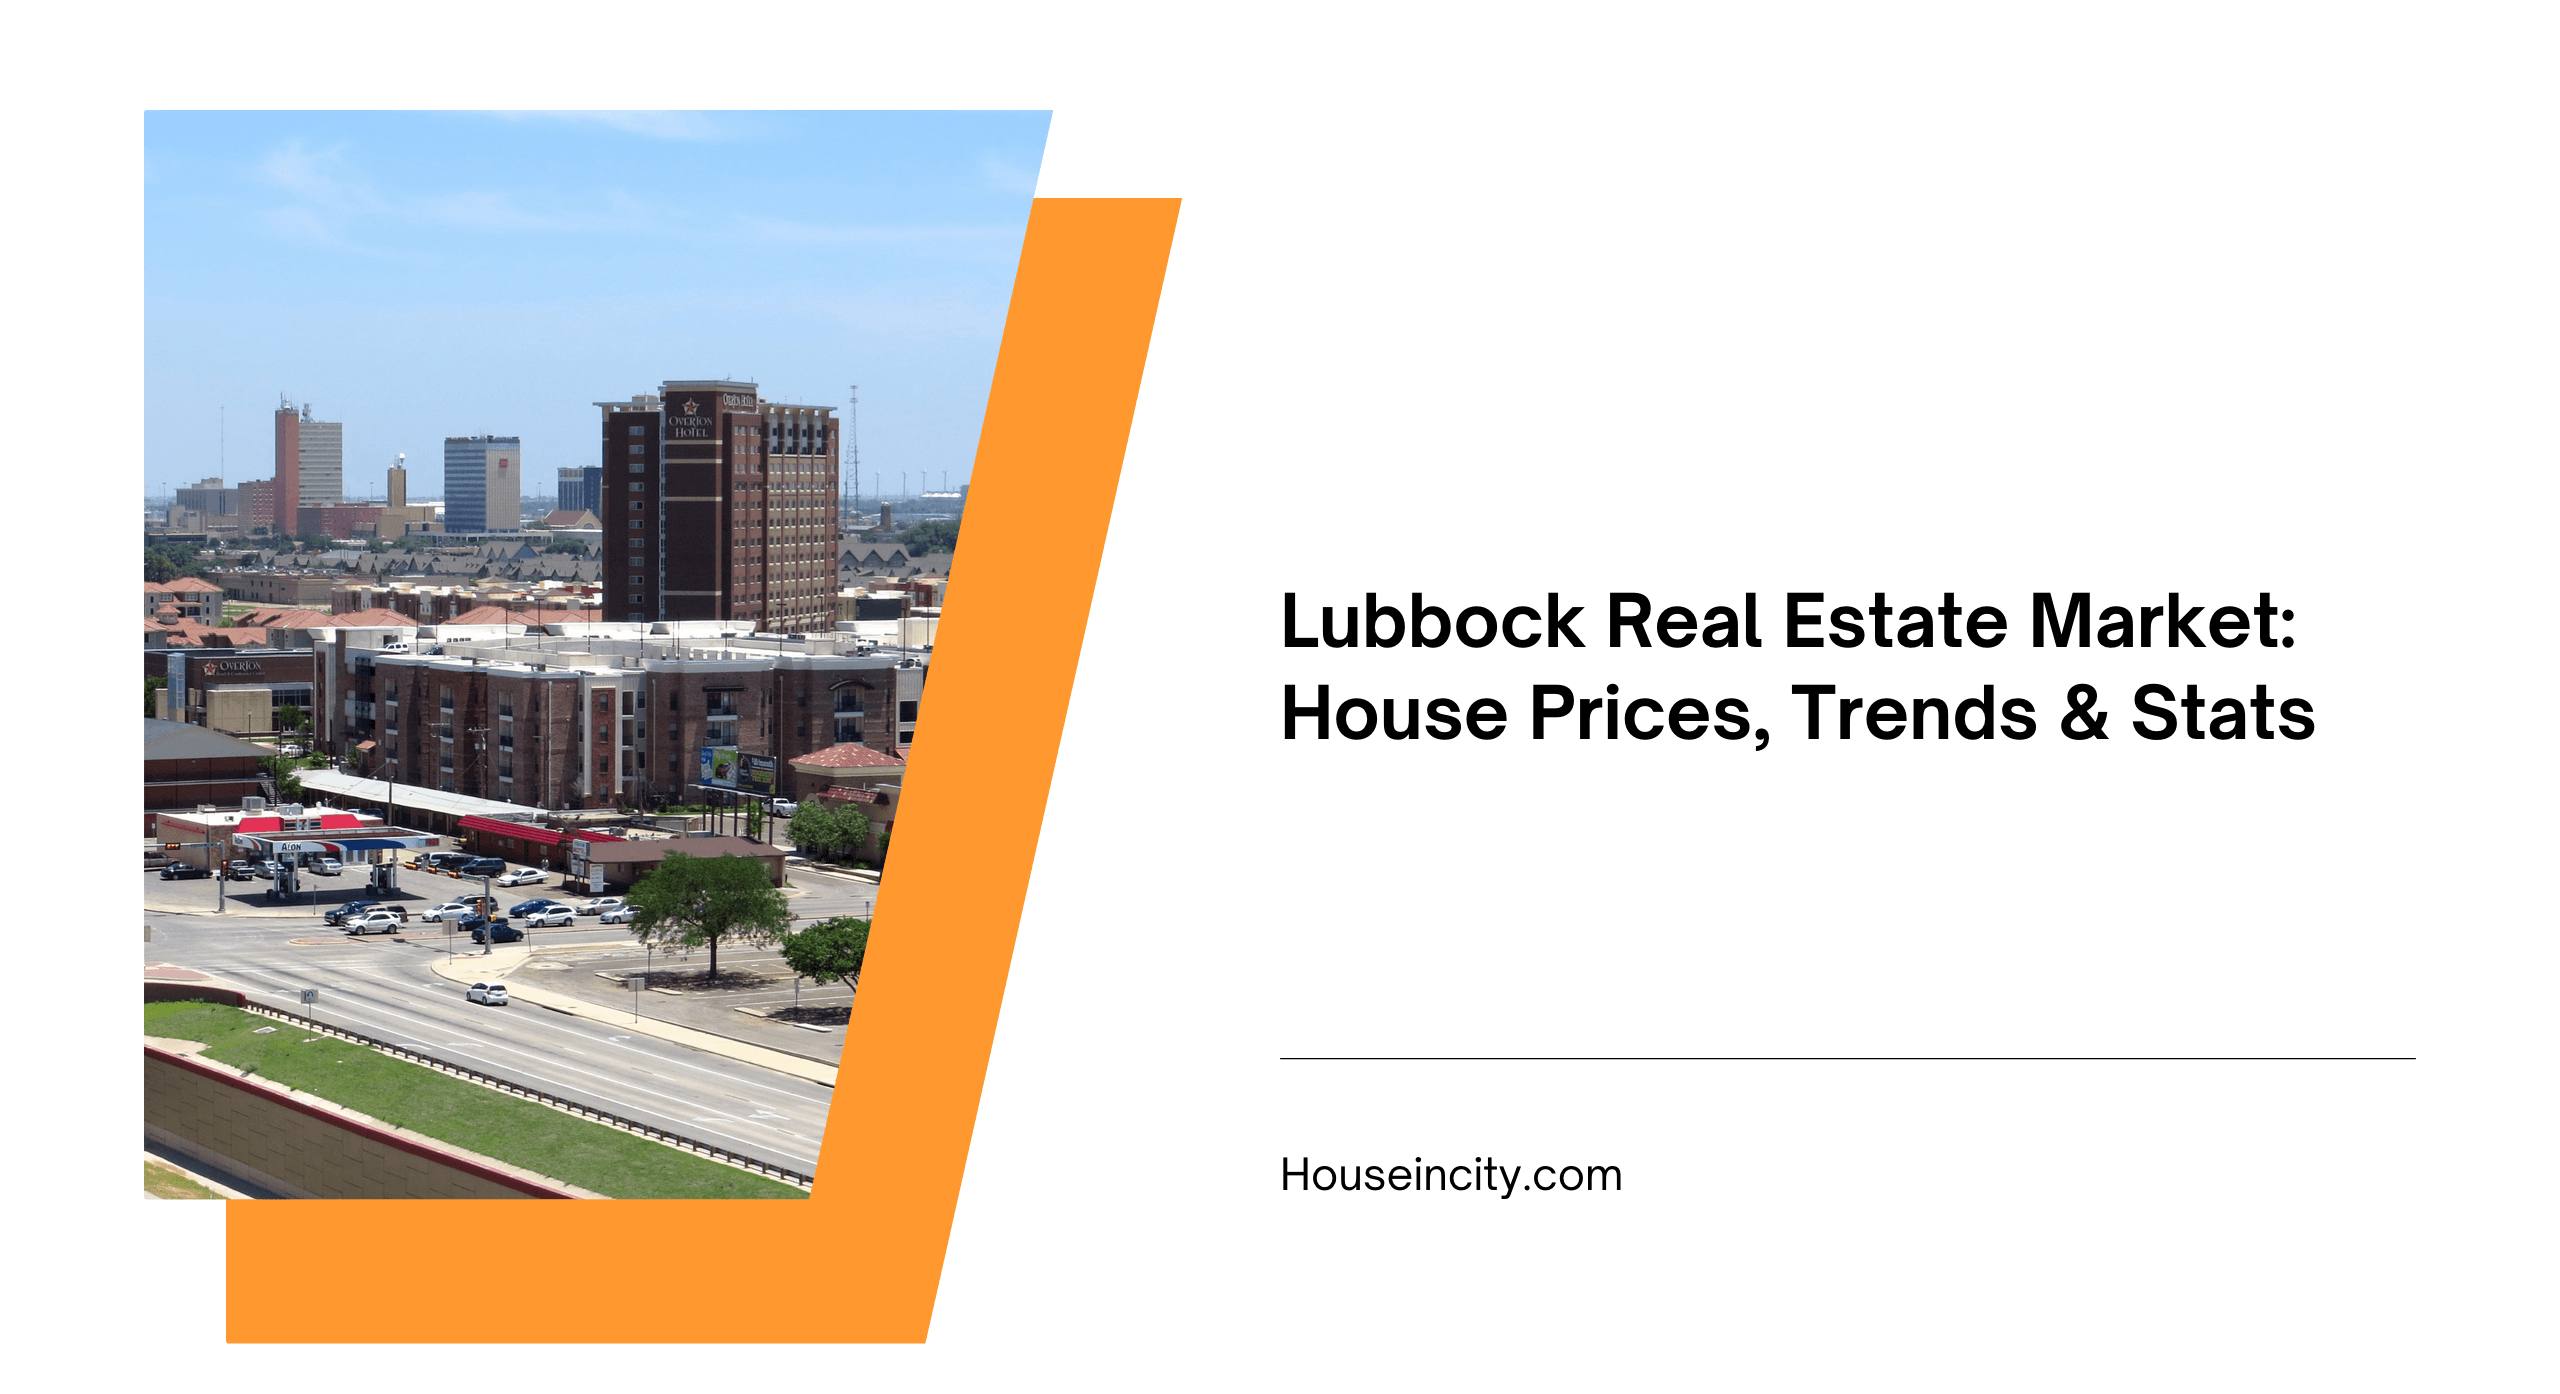 Lubbock Real Estate Market: House Prices, Trends & Stats